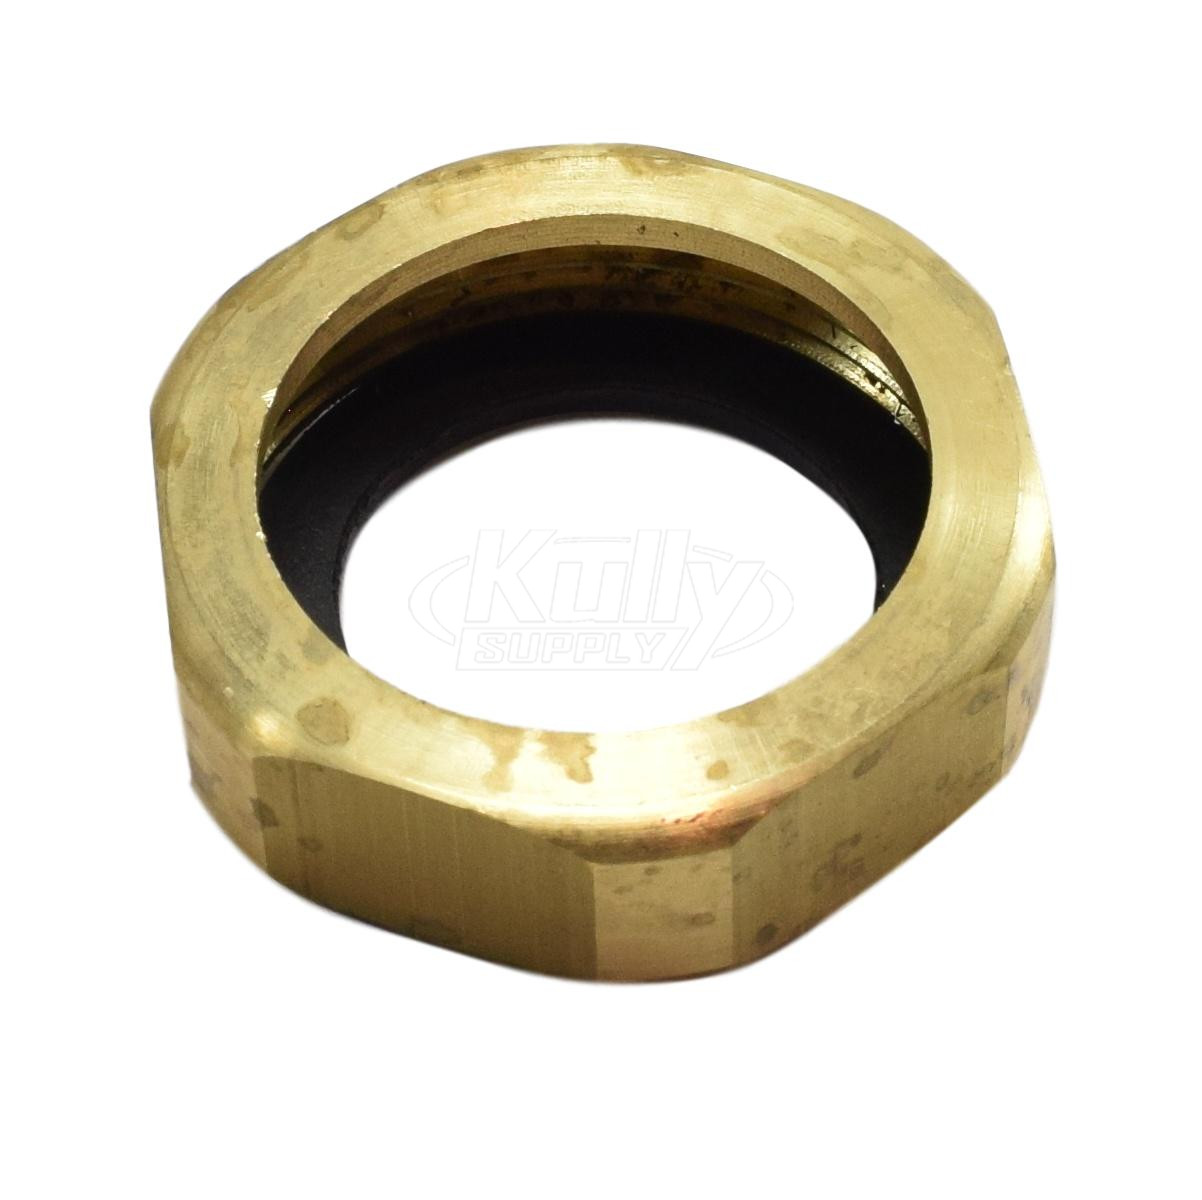 Sloan F-2-A Rough Brass Coupling Assembly 1-1/2 (with S-2)